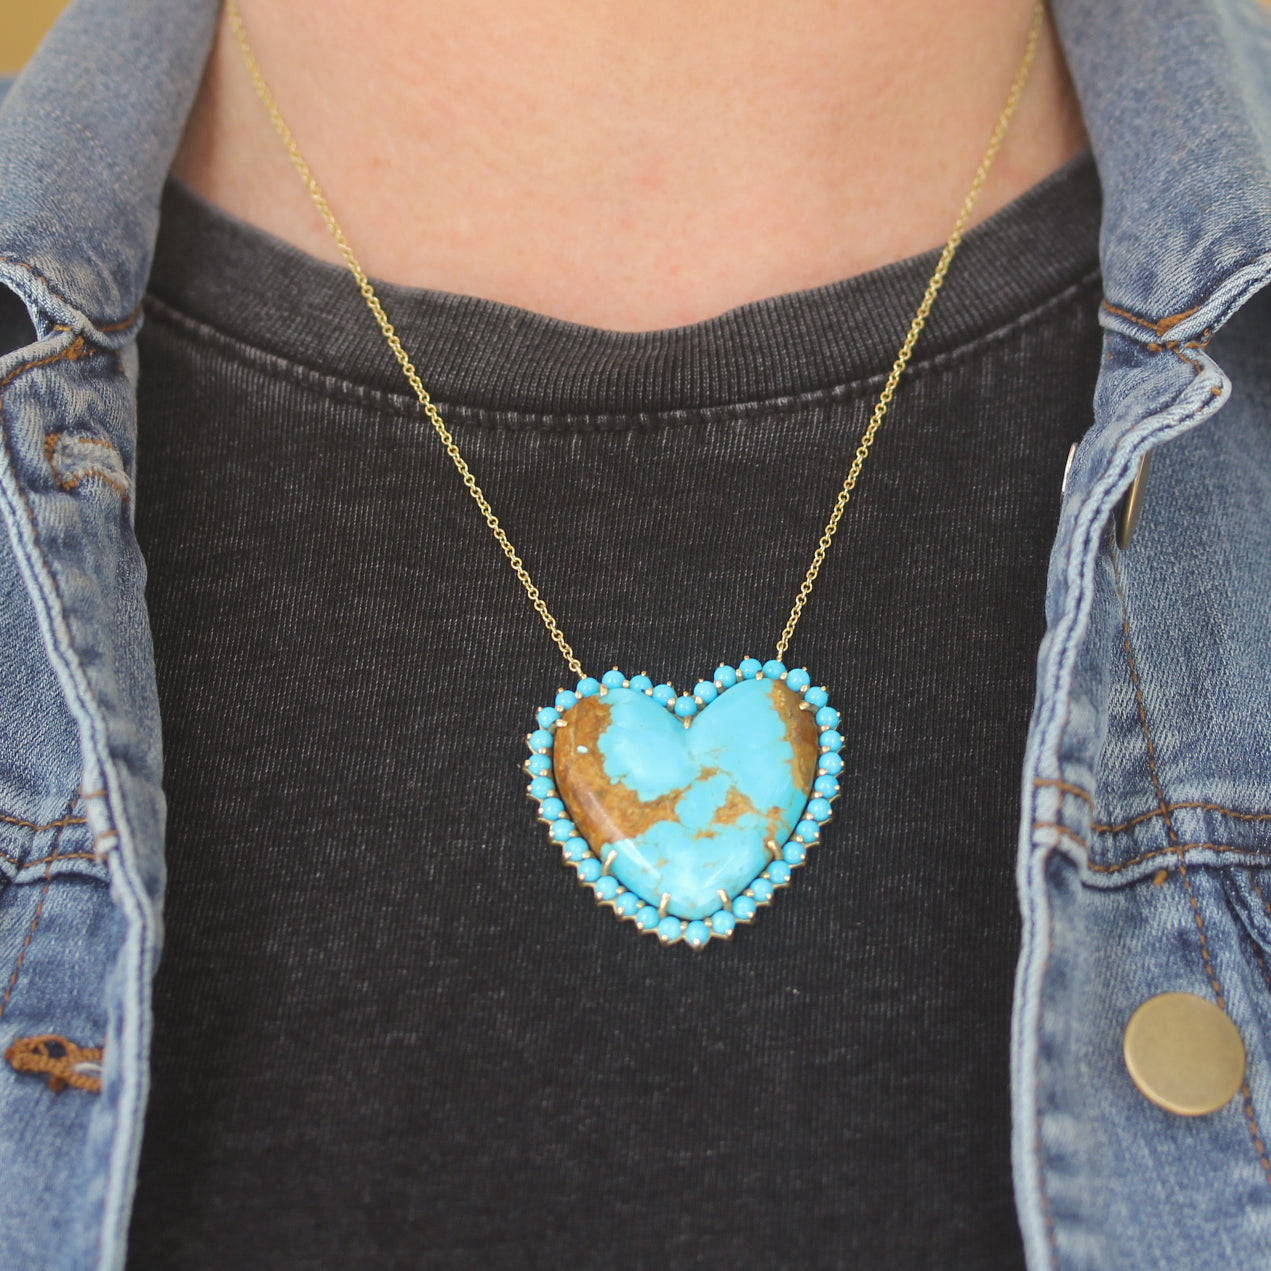 Suzy Landa one-of-a-kind "Nevada" heart shaped turquoise necklace - Be On Park